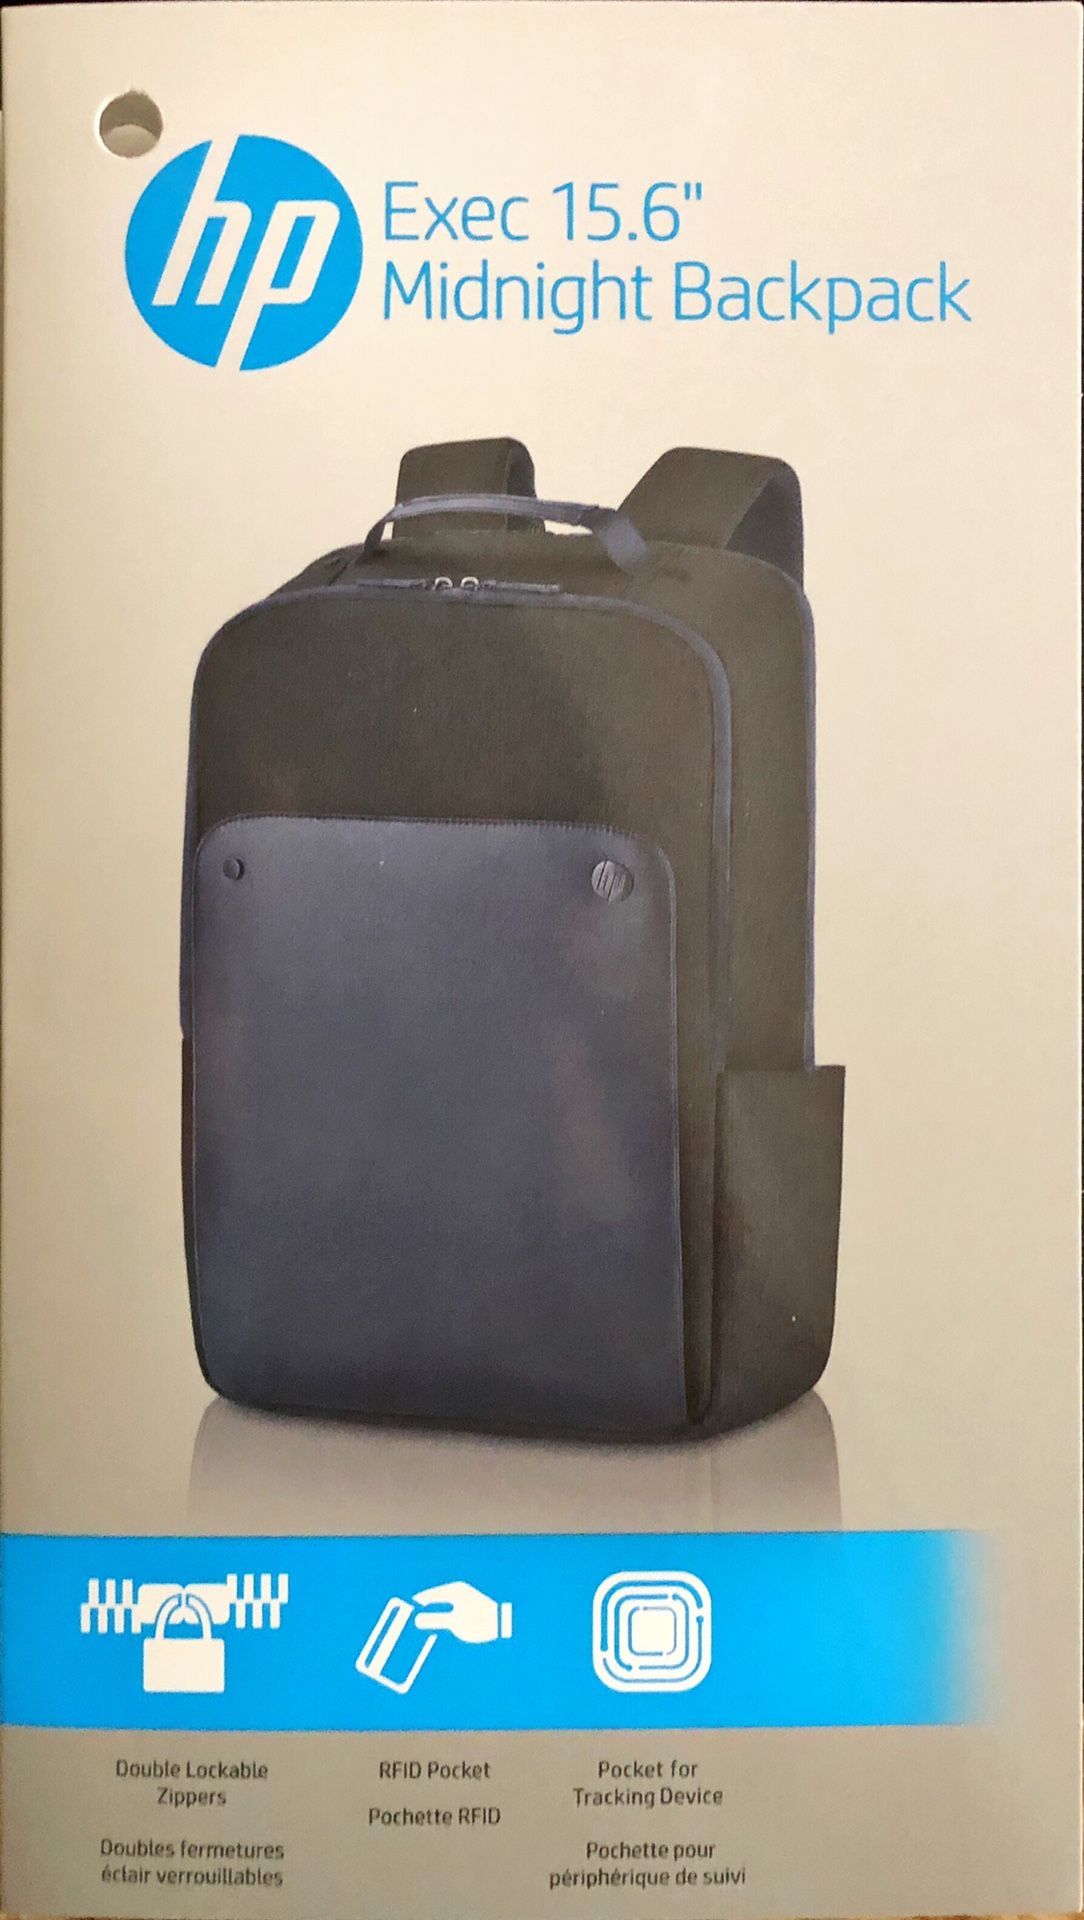 HP Exec 15.6” Midnight Backpack for 15.6”/39.6cm Computer